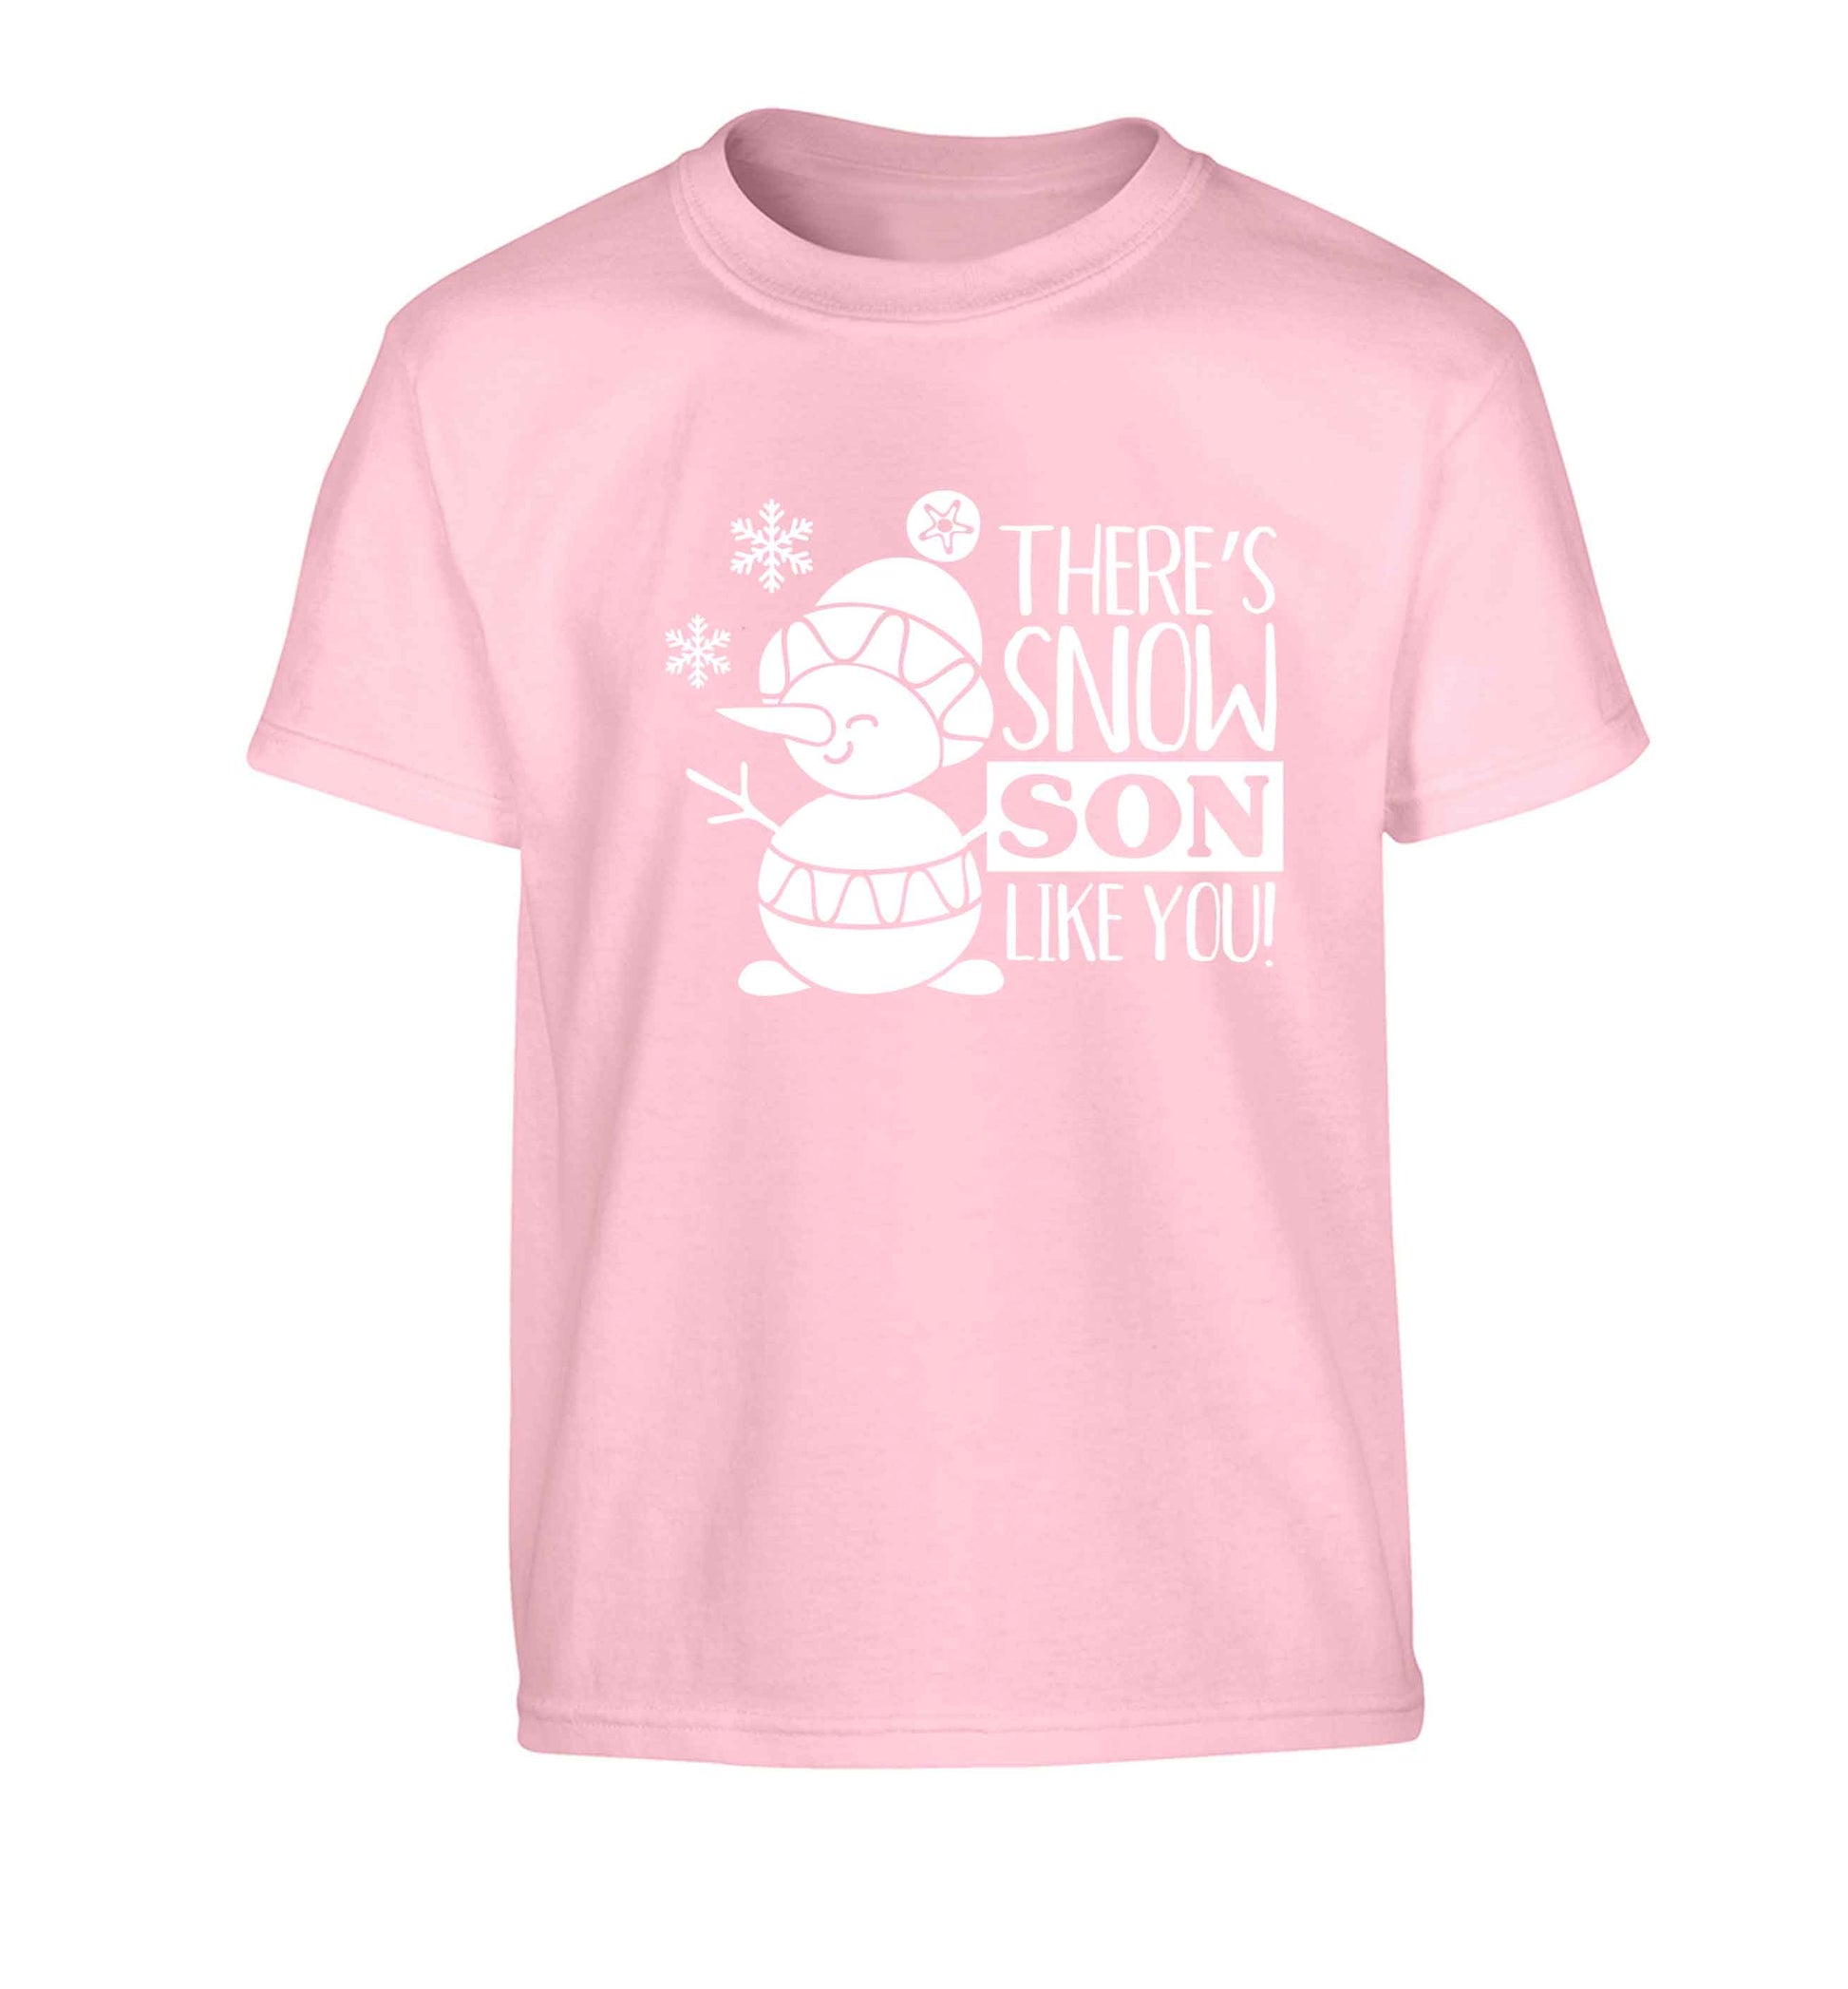 There's snow son like you Children's light pink Tshirt 12-13 Years